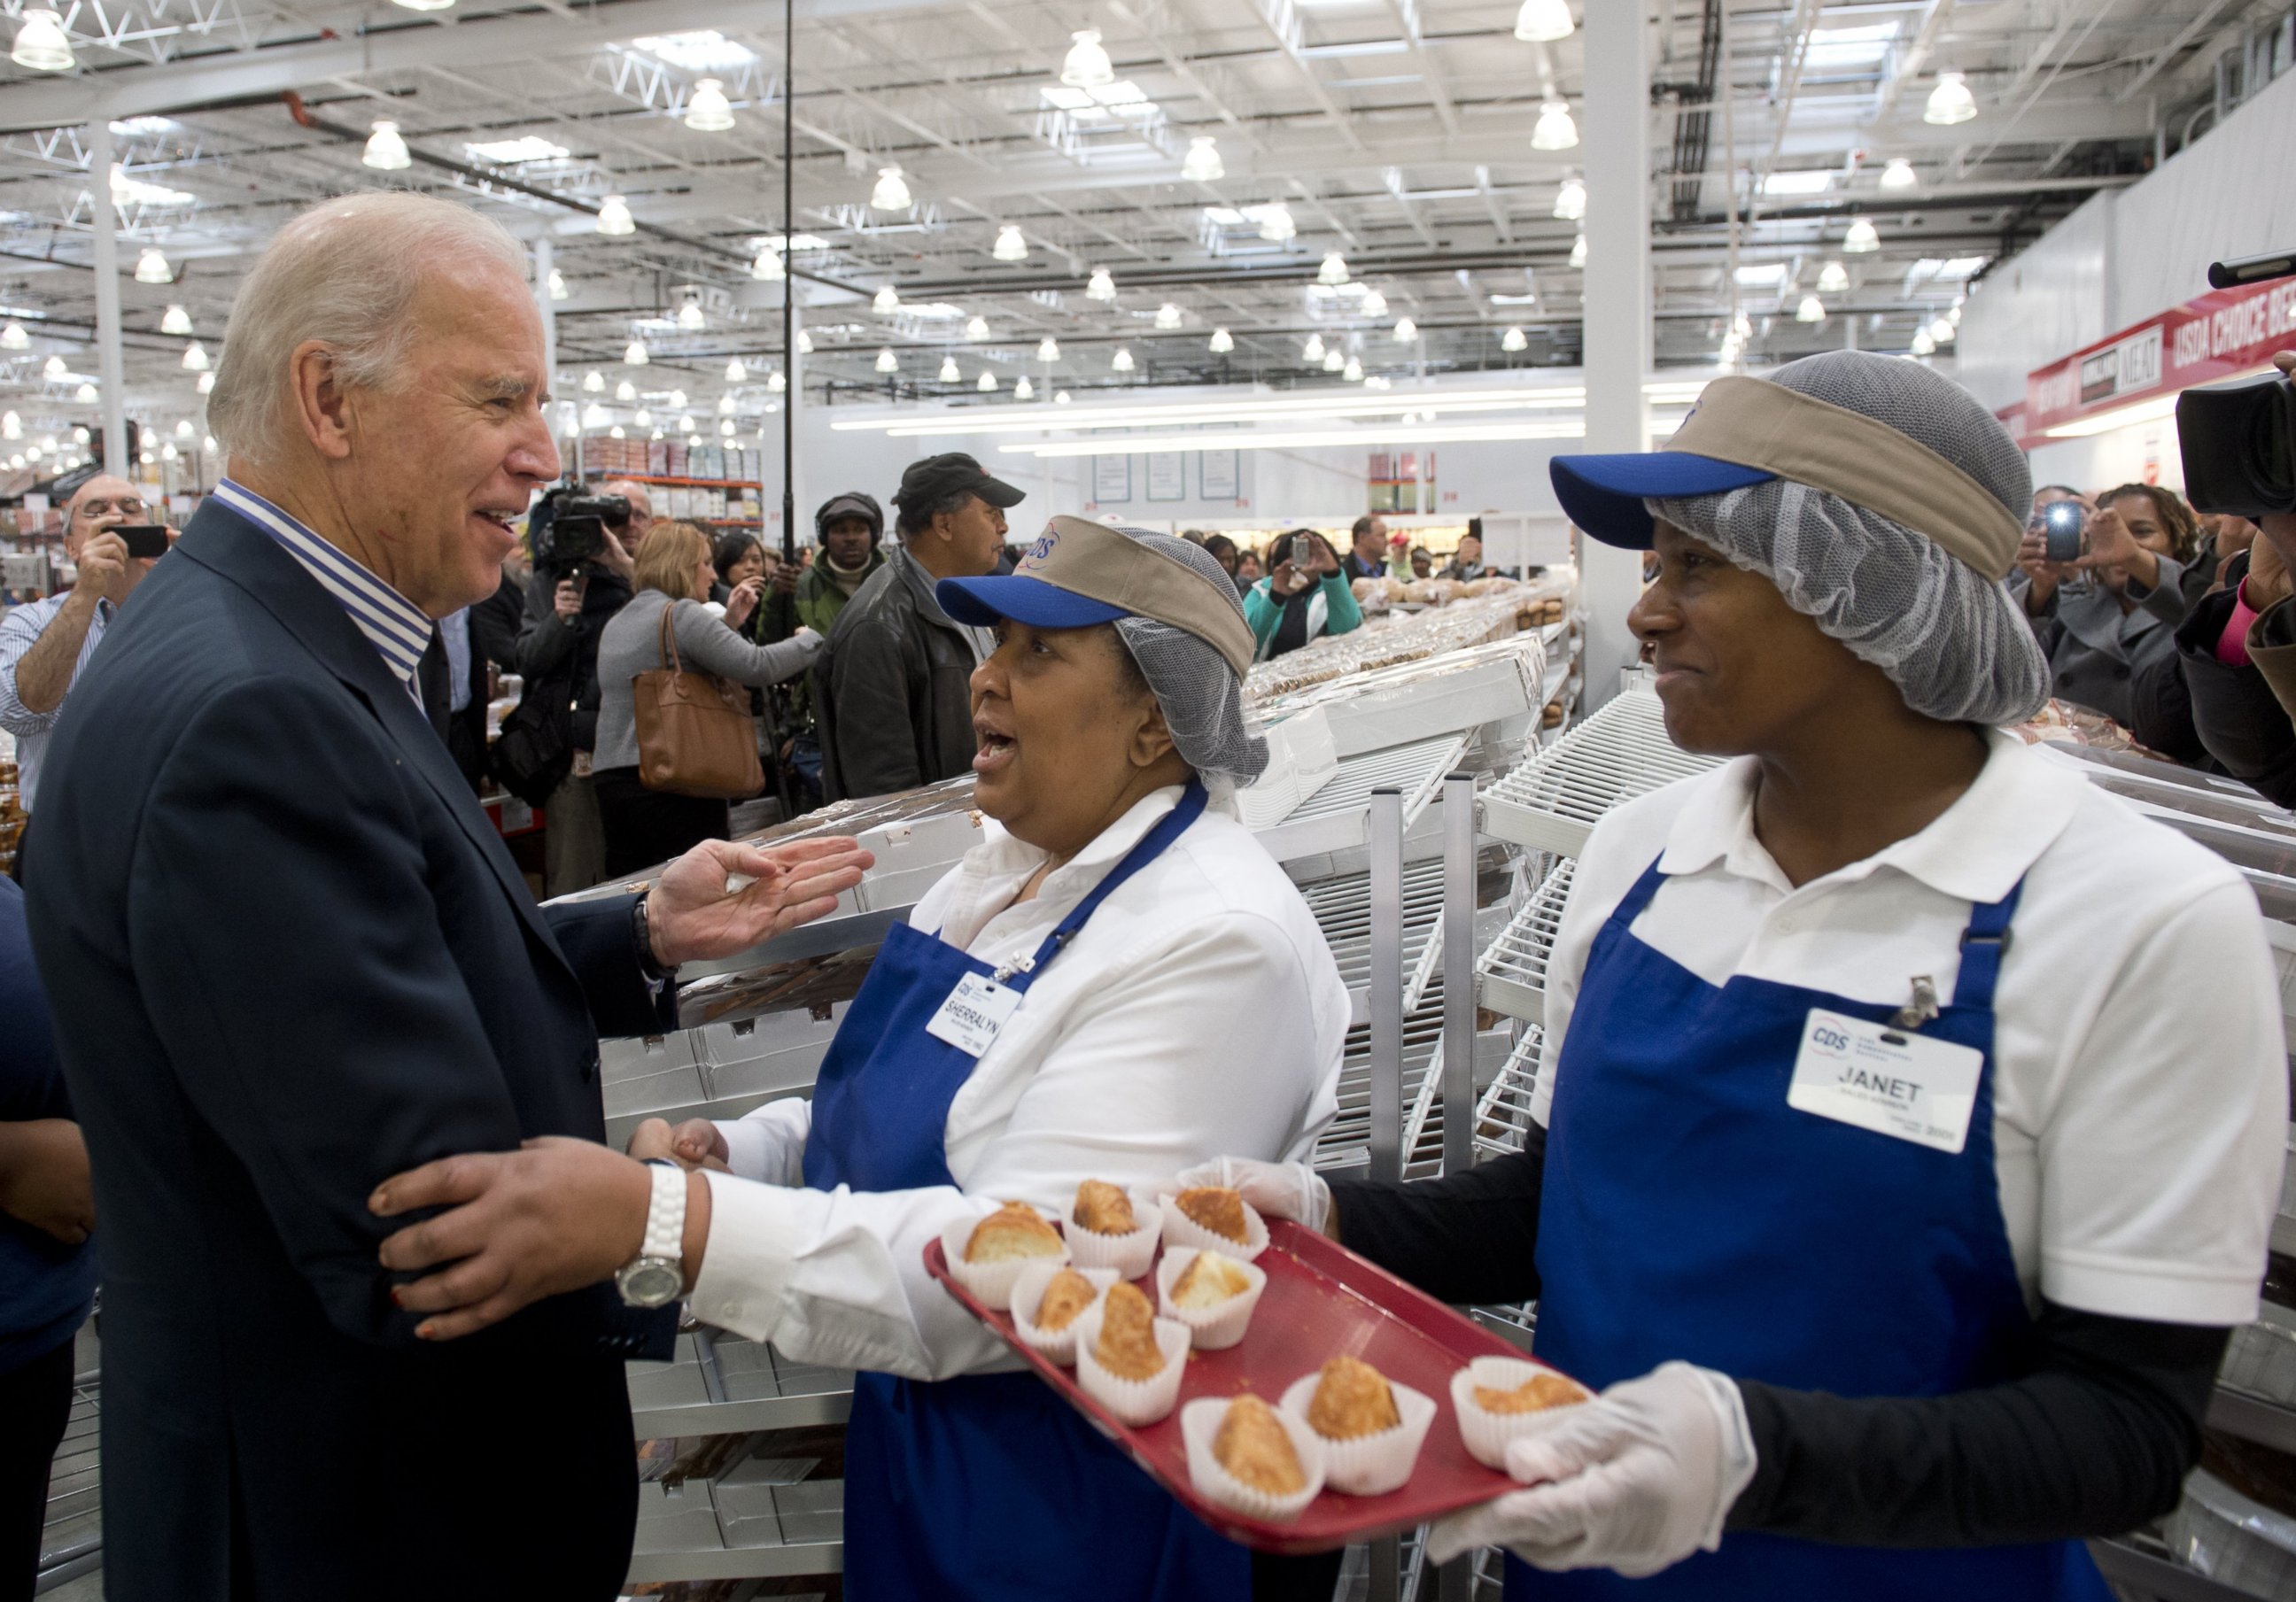 PHOTO: Vice President Joe Biden tries food samples during a visit to a Costco store on a shopping trip in Washington, DC, on Nov. 29, 2012.